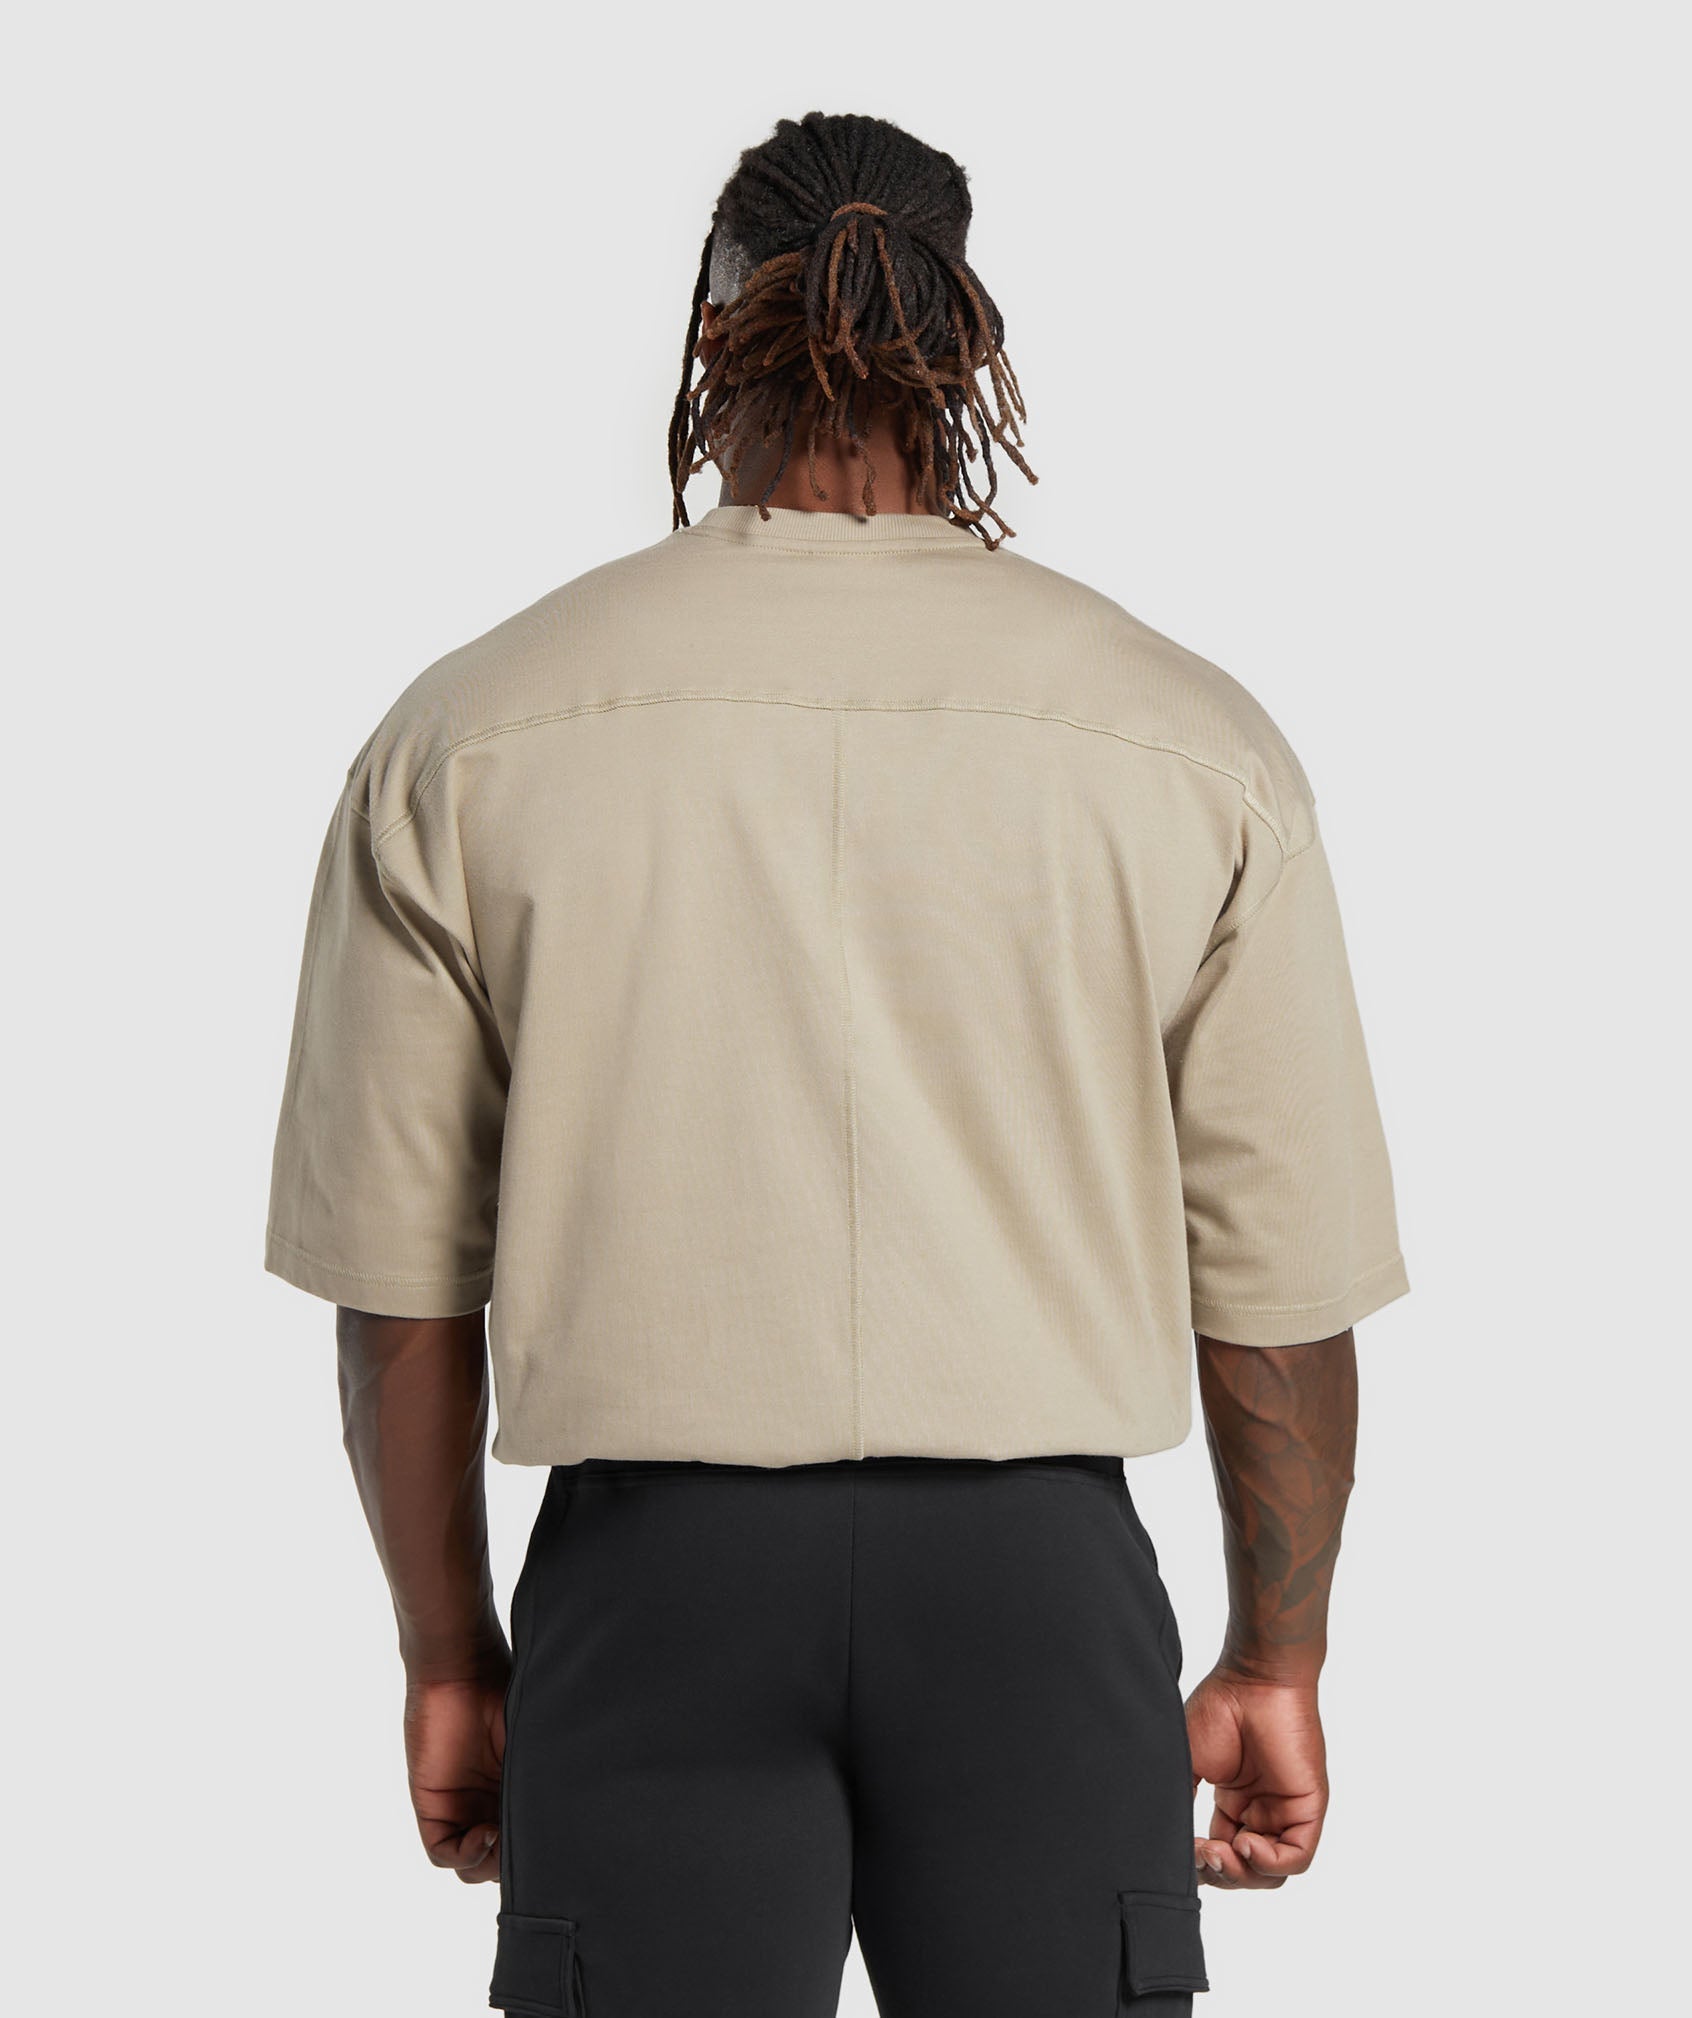 Premium Lifting T-Shirt in Sand Brown - view 3